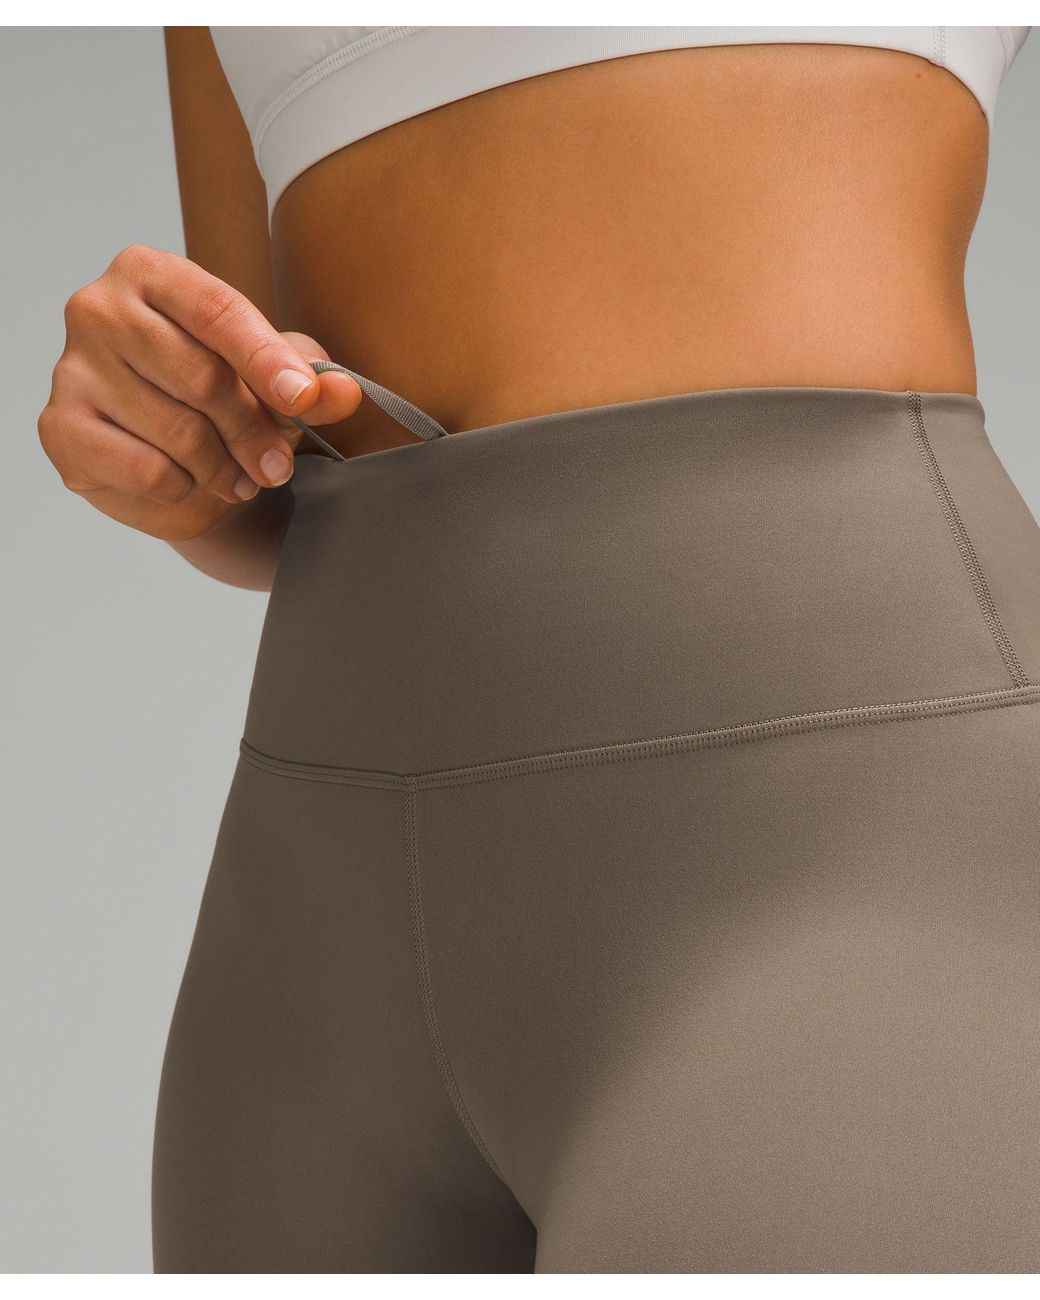 lululemon athletica Wunder Train Contour Fit High-rise Shorts - 6 - Color  Brown - Size 0 in Gray